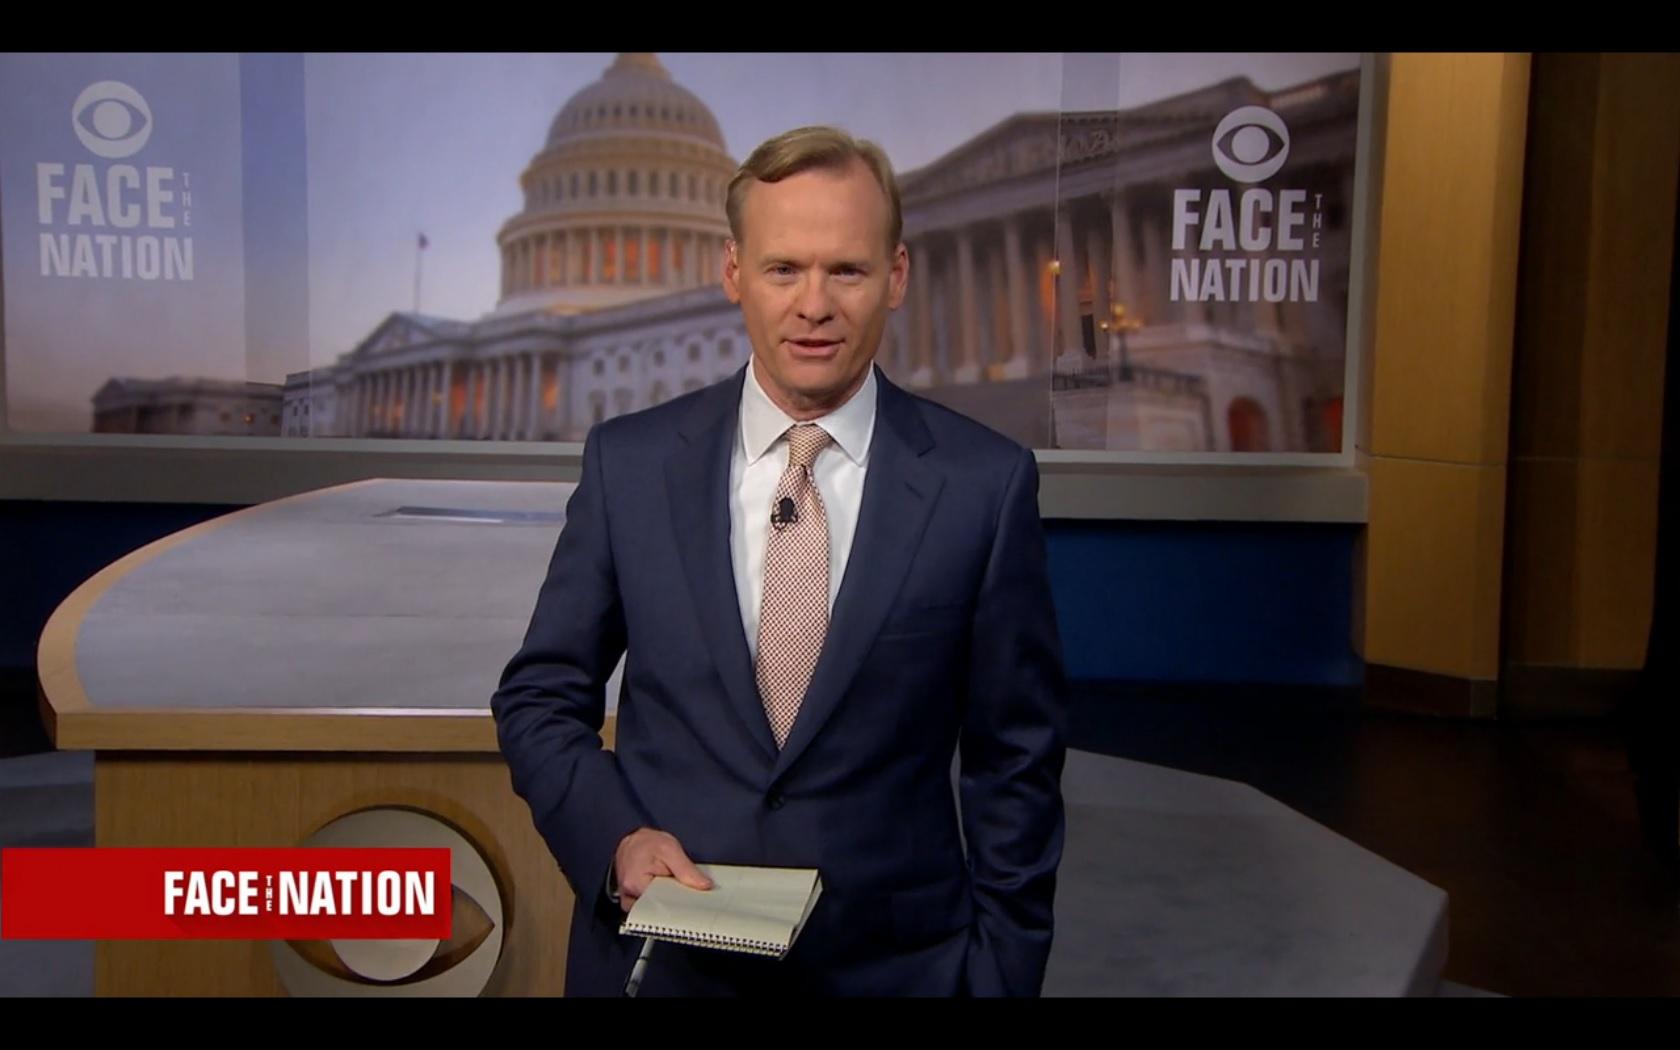 Viacomcbs Press Express Cbs News “face The Nation” Is The 1 Sunday Morning Public Affairs